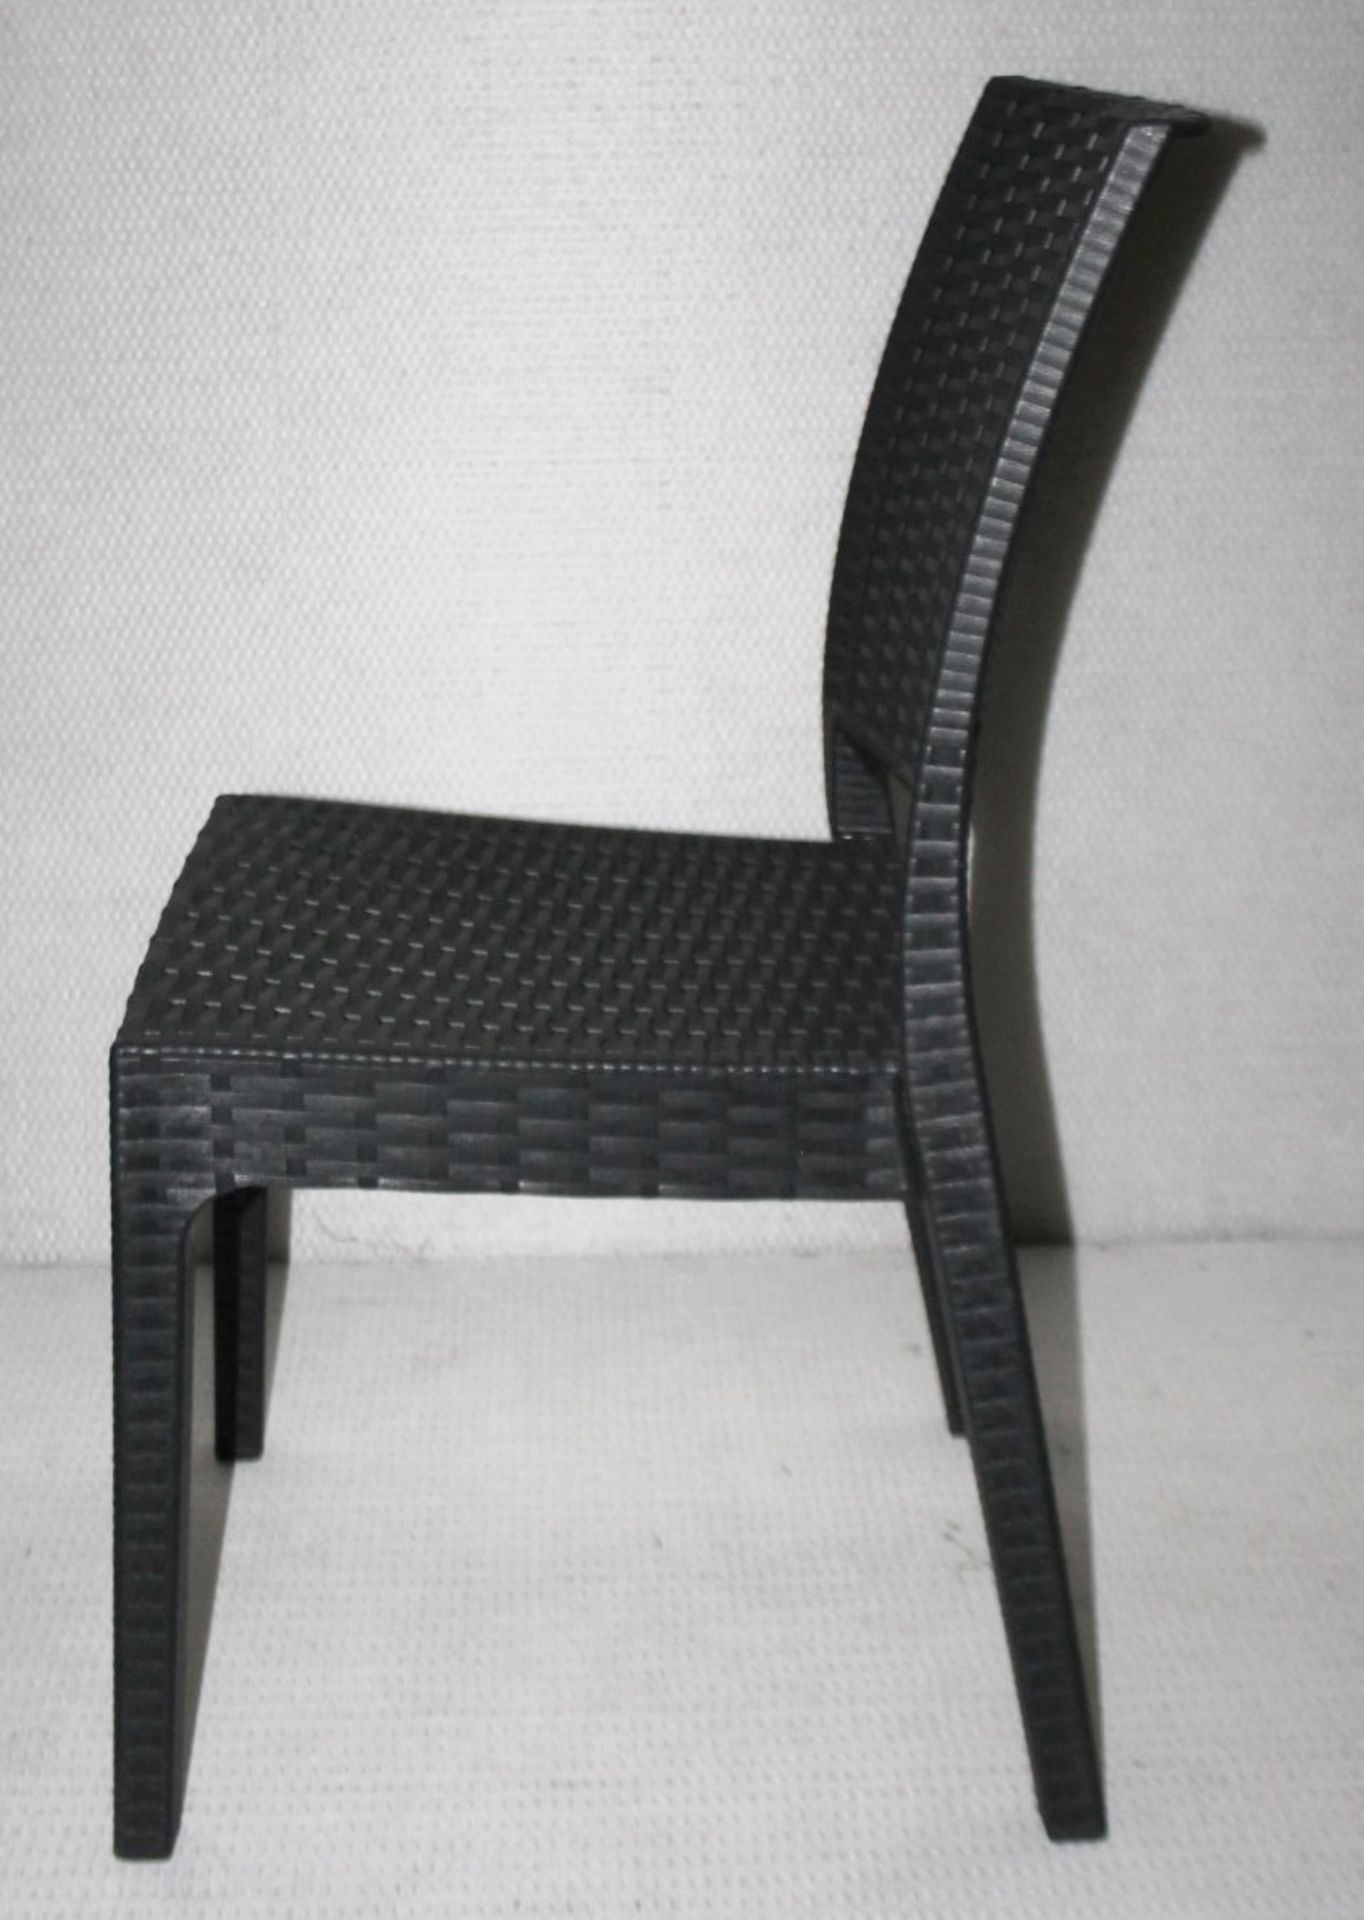 8 x SIESTA EXCLUSIVE 'Florida' Commercial Stackable Rattan-style Chairs In Dark Grey -CL987 - - Image 3 of 13